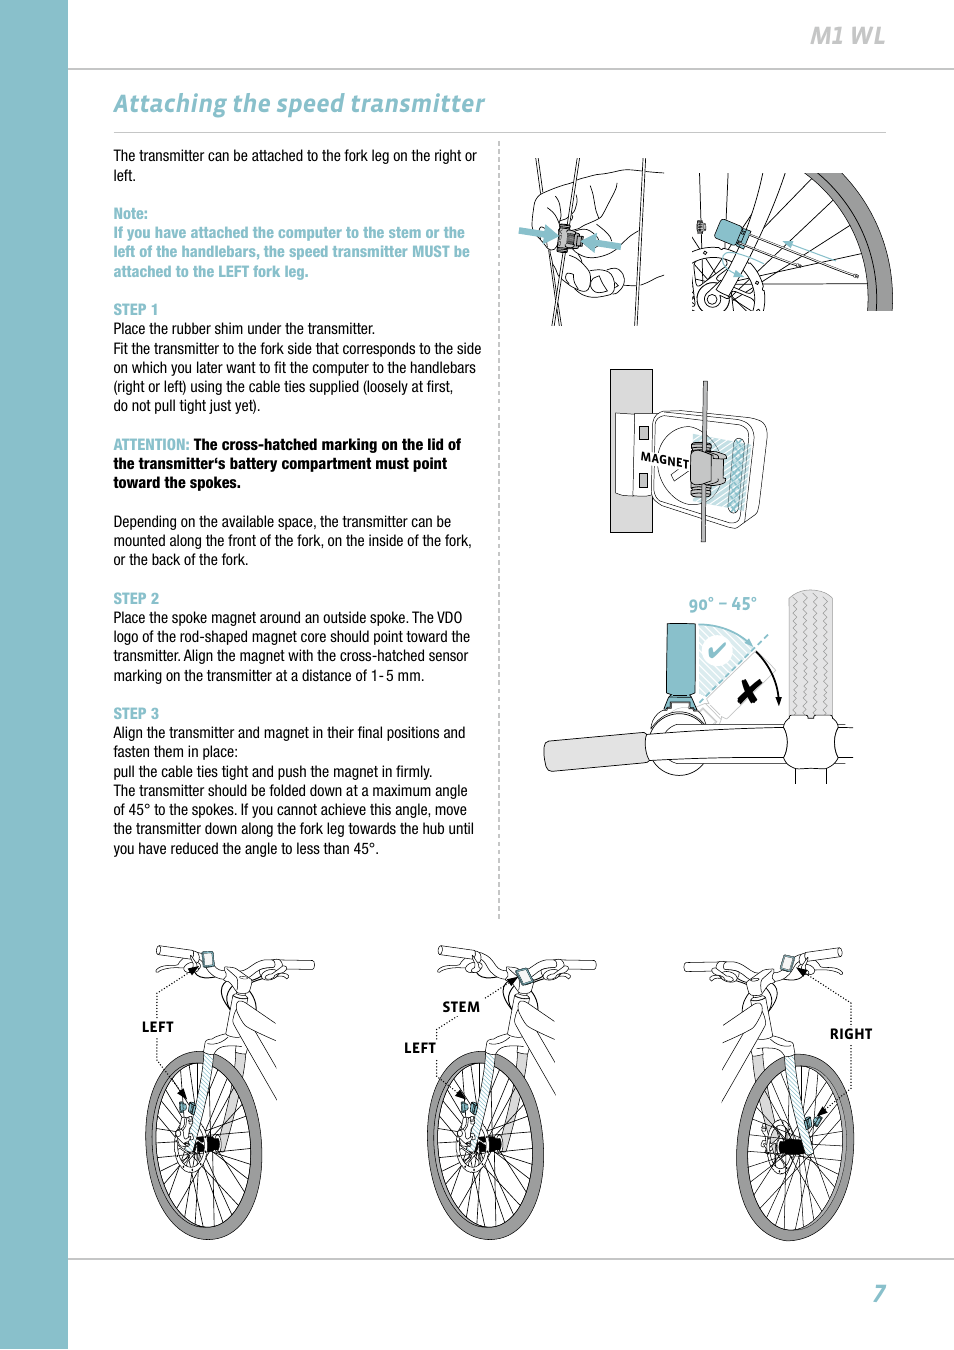 7m1 wl, Attaching the speed transmitter | VDO M1WL User Manual | Page 7 / 26